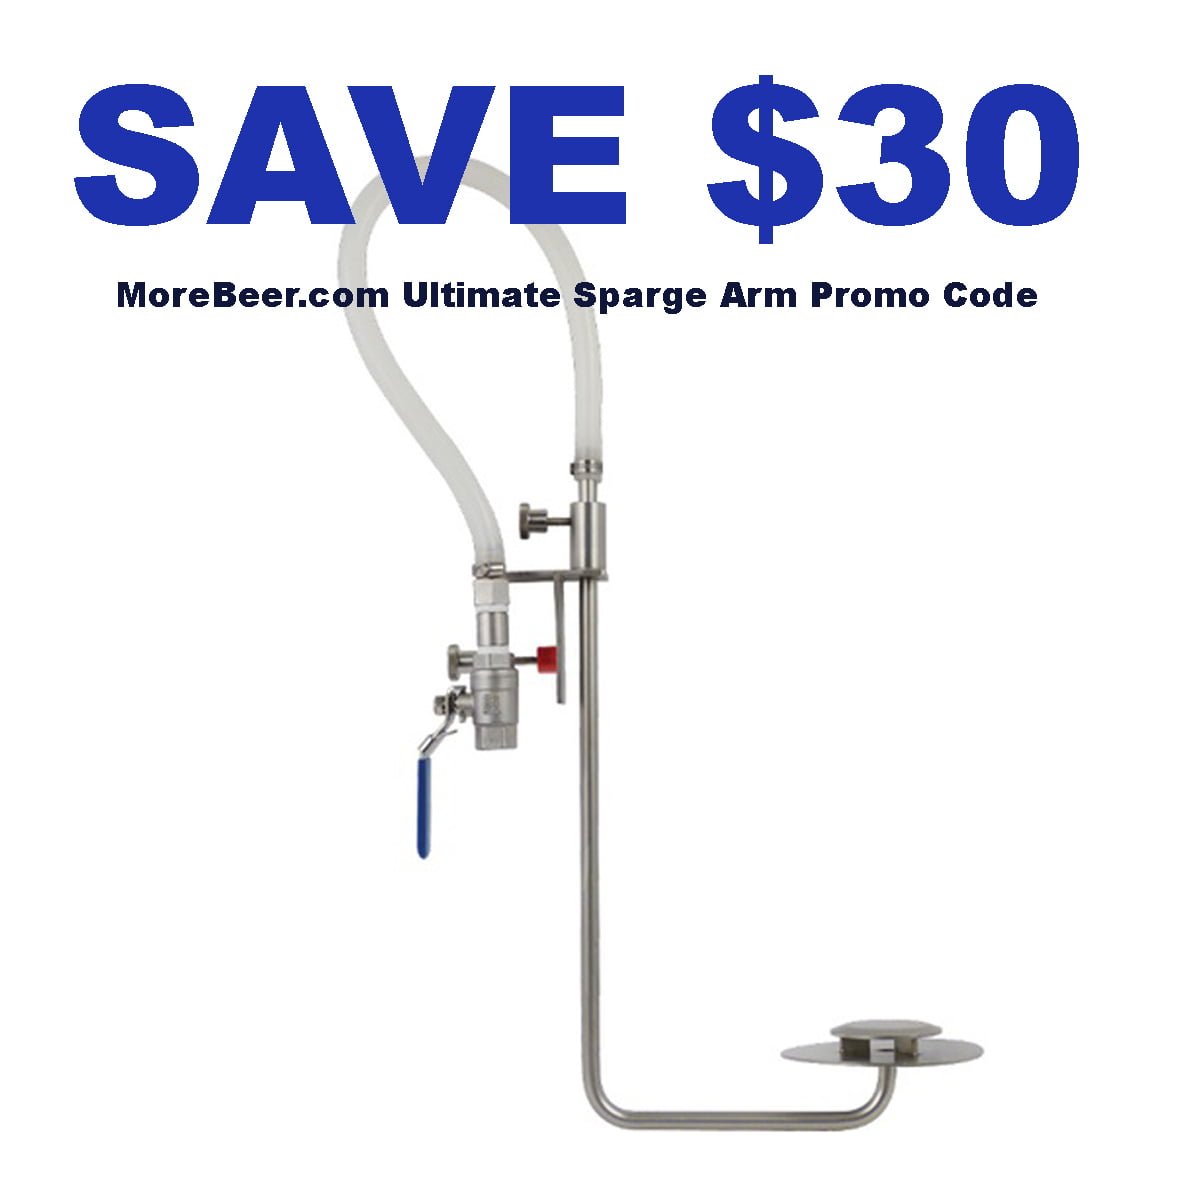 Save $30 at MoreBeer.com on their 5 Star Rated Ultimate Sparge Arm